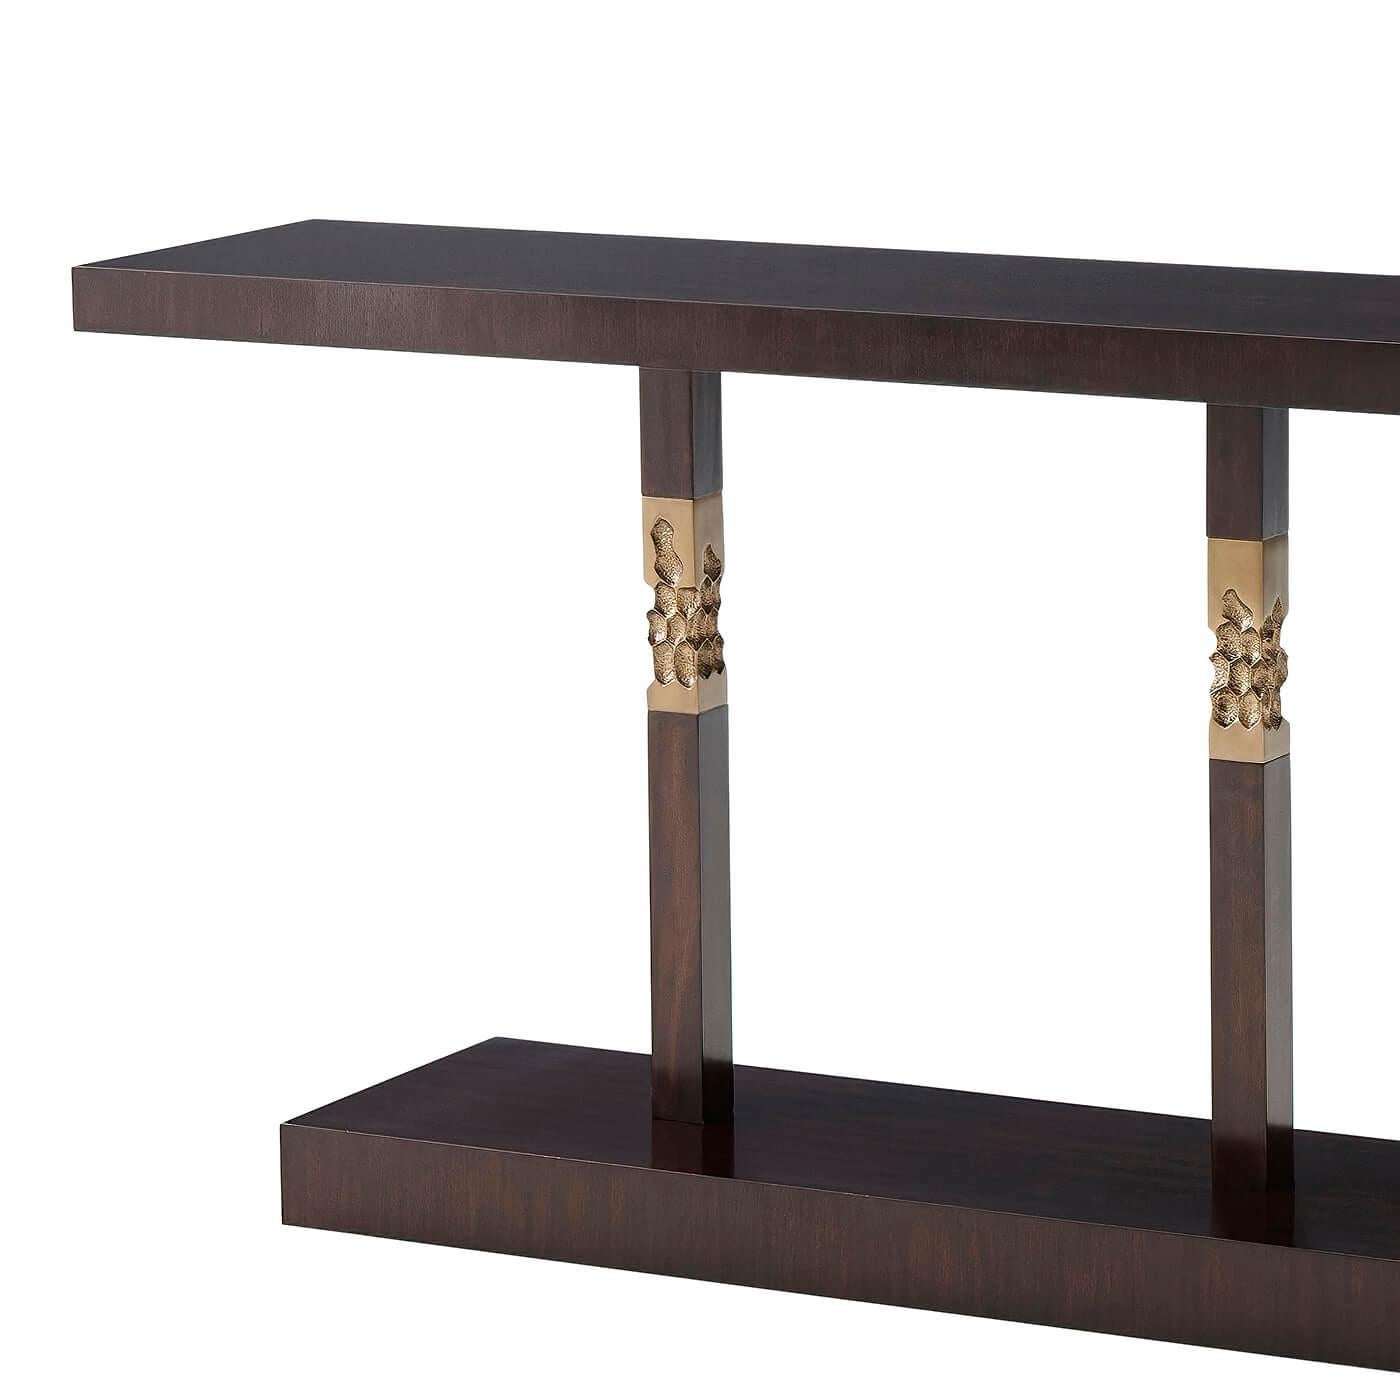 Modern console table with solid mahogany and veneer in an espresso finish with textured brass accented square brutalist columns.
Dimensions: 80